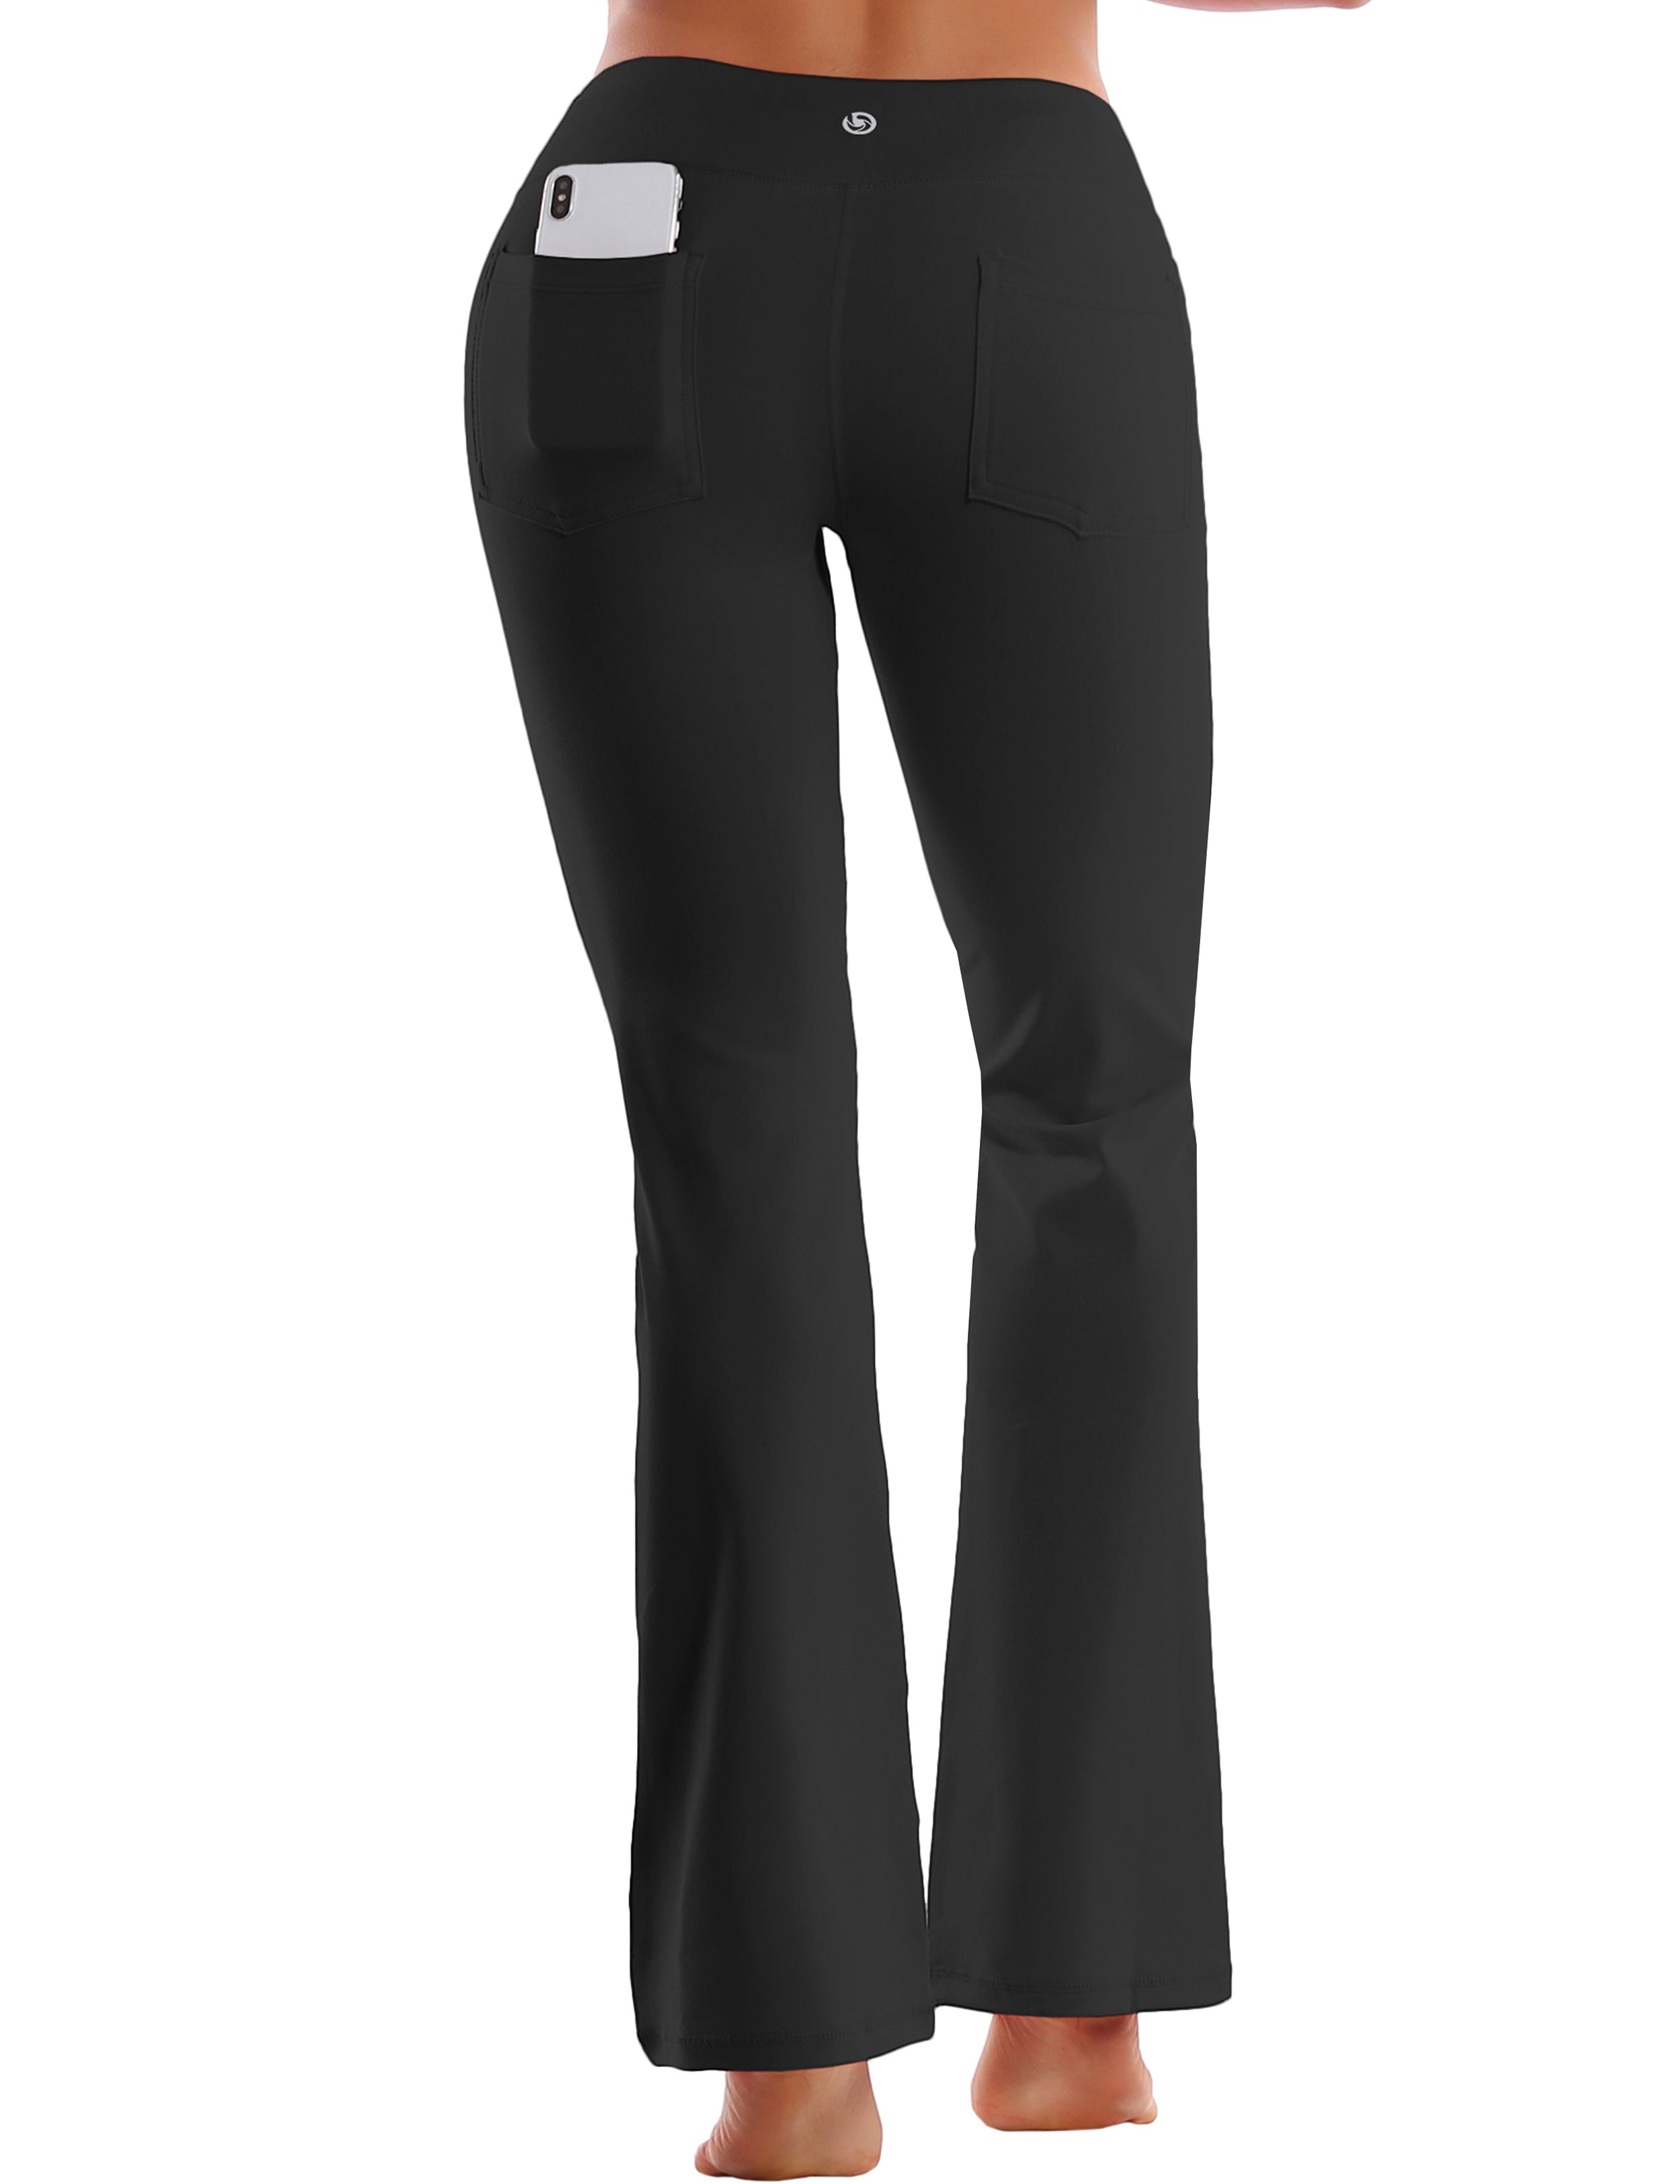 29 31 33 35 Bootcut Leggings with Pockets scarlet ins – bubblelime